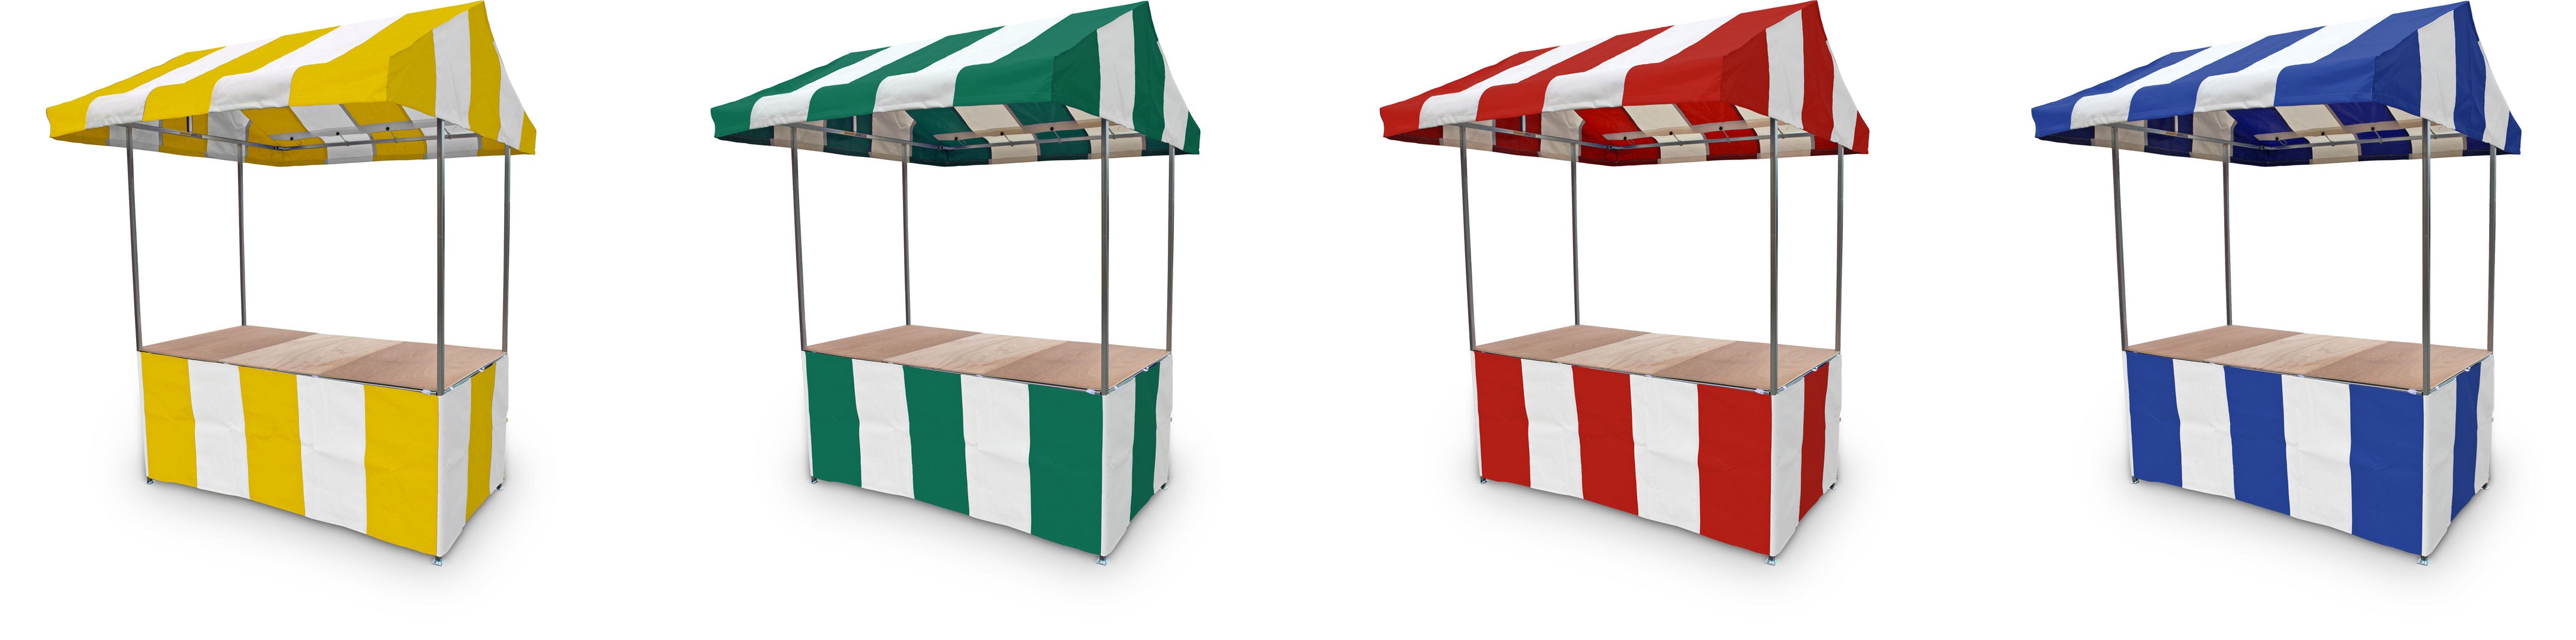 Market Stall Canopy and Counter Wrap Colour